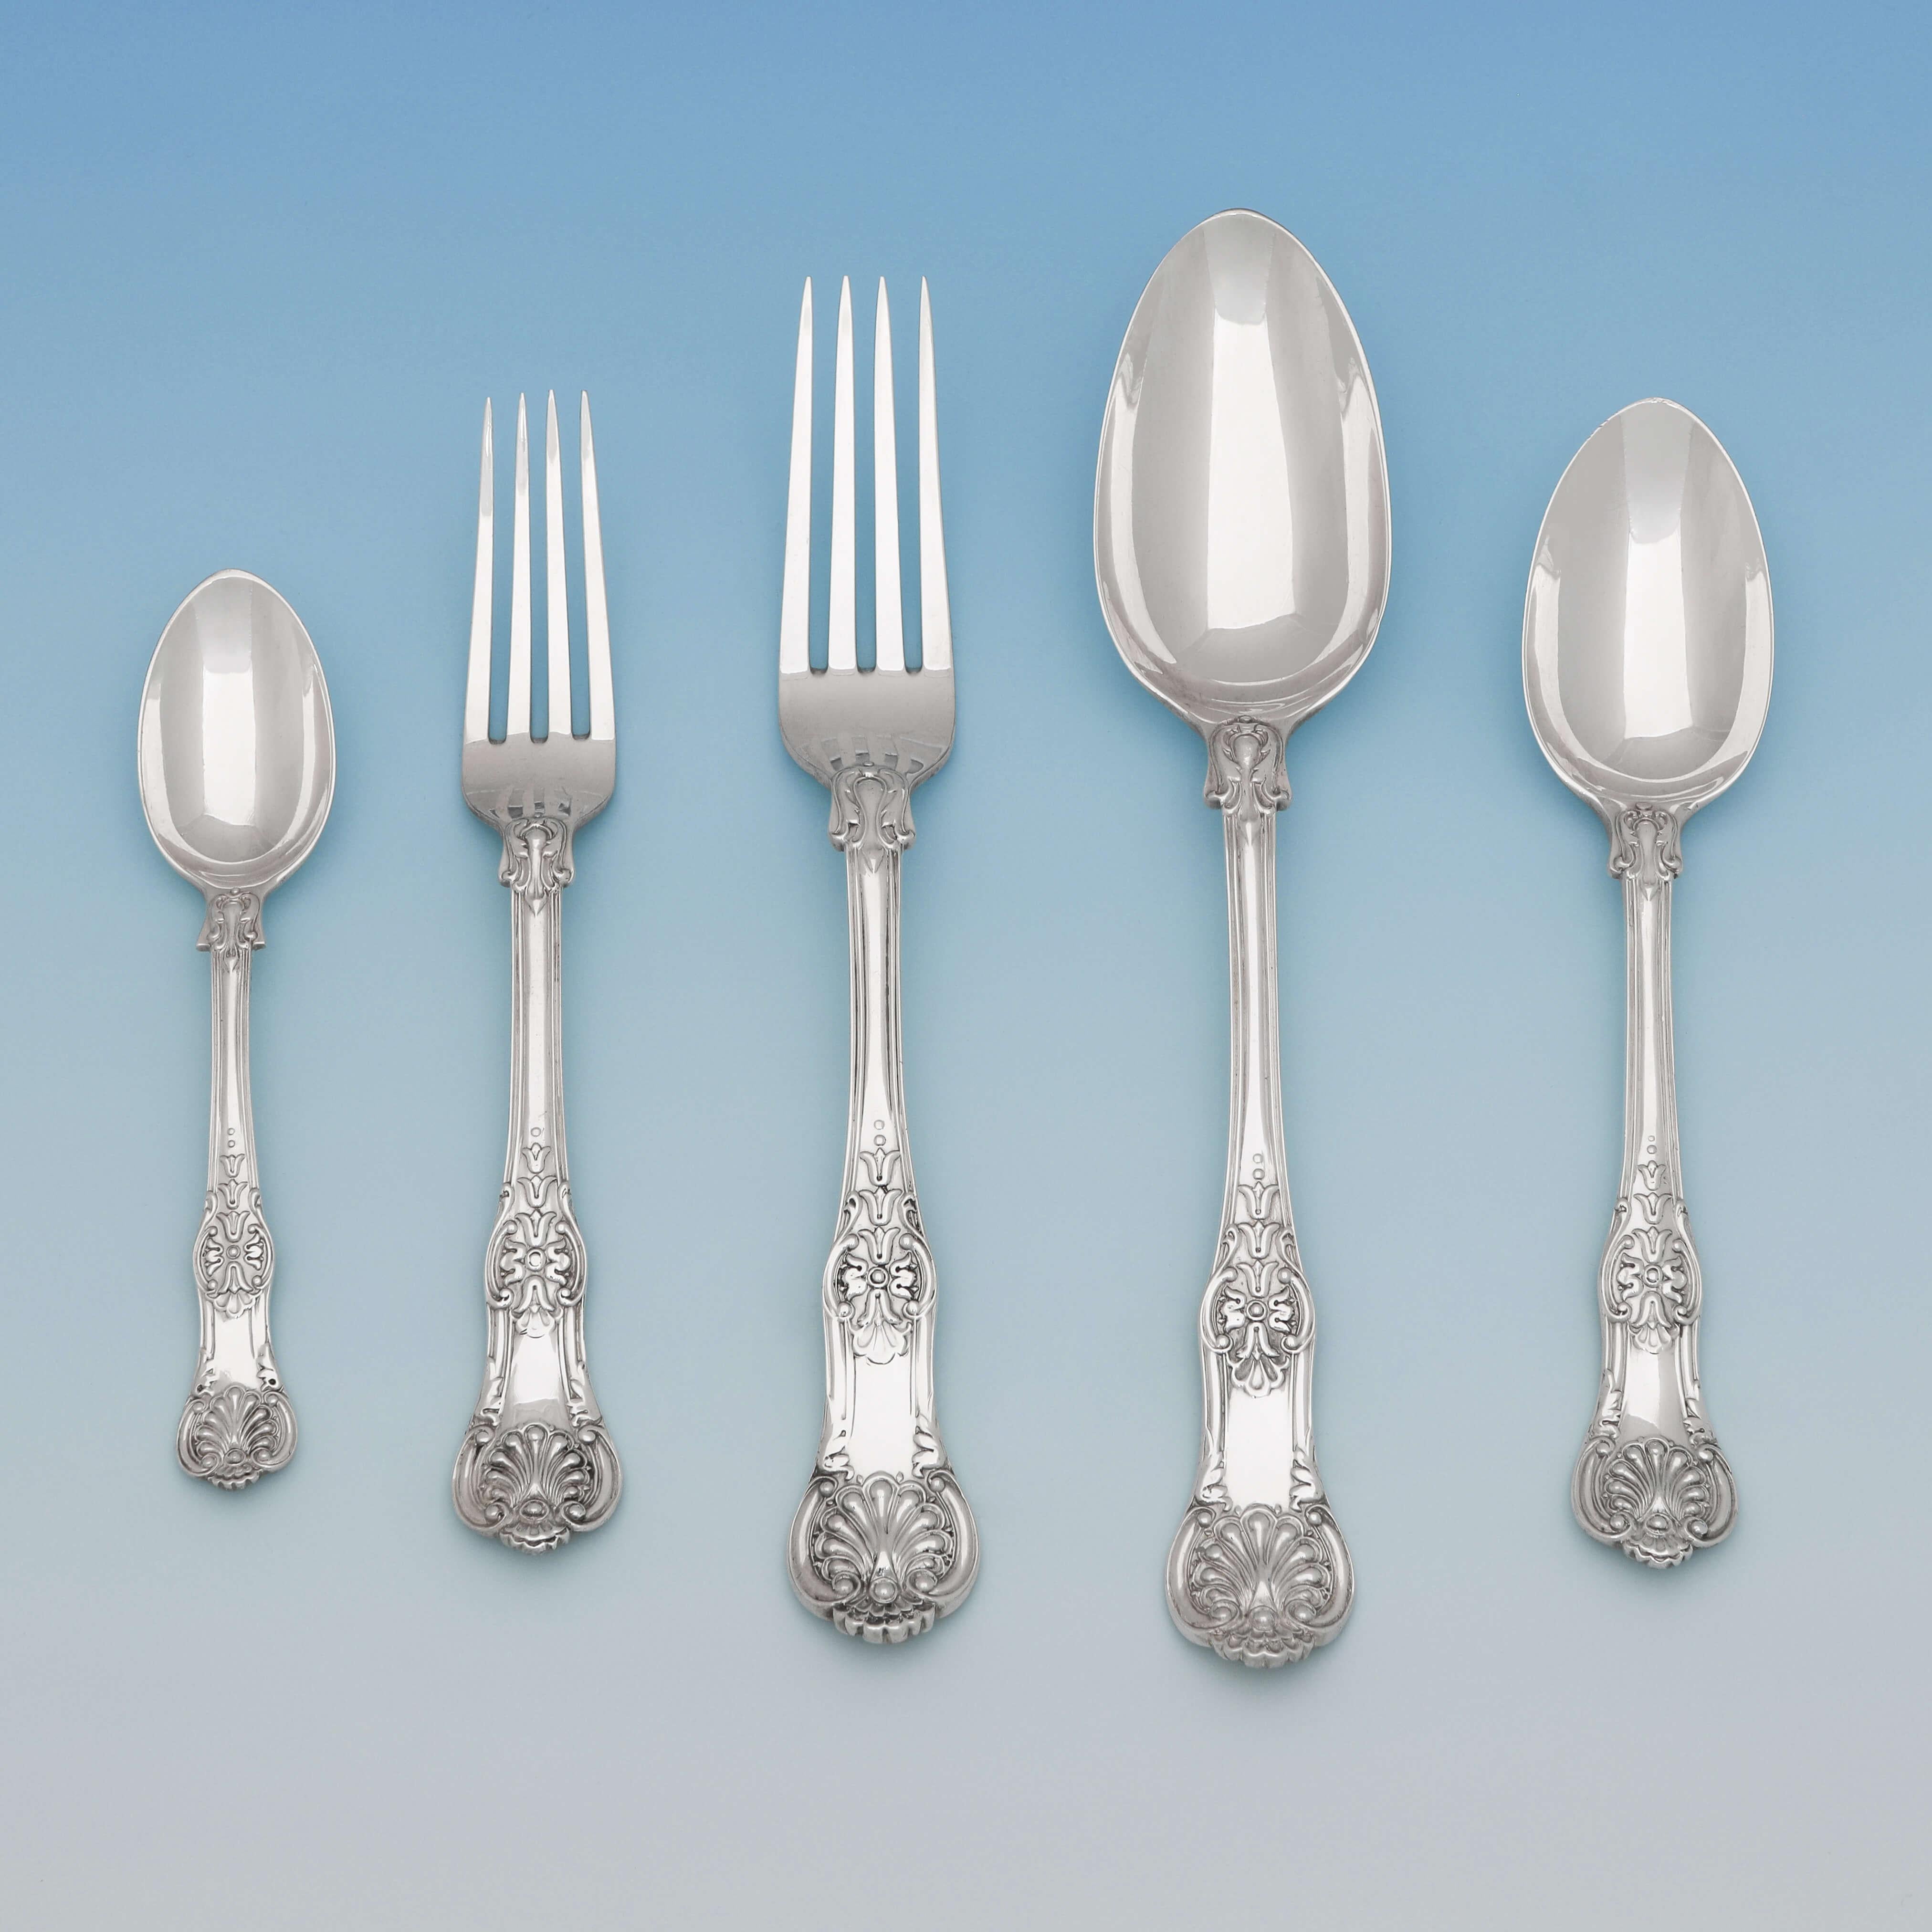 A boxed, Single Maker, Single Year set of Antique, Sterling Silver Queens Rosette Pattern Flatware, made in London in 1906 by Holland, Aldwinckle & Slater. 

Please note this is a variant of Queens with a beautiful Rosette on the back.

Sold